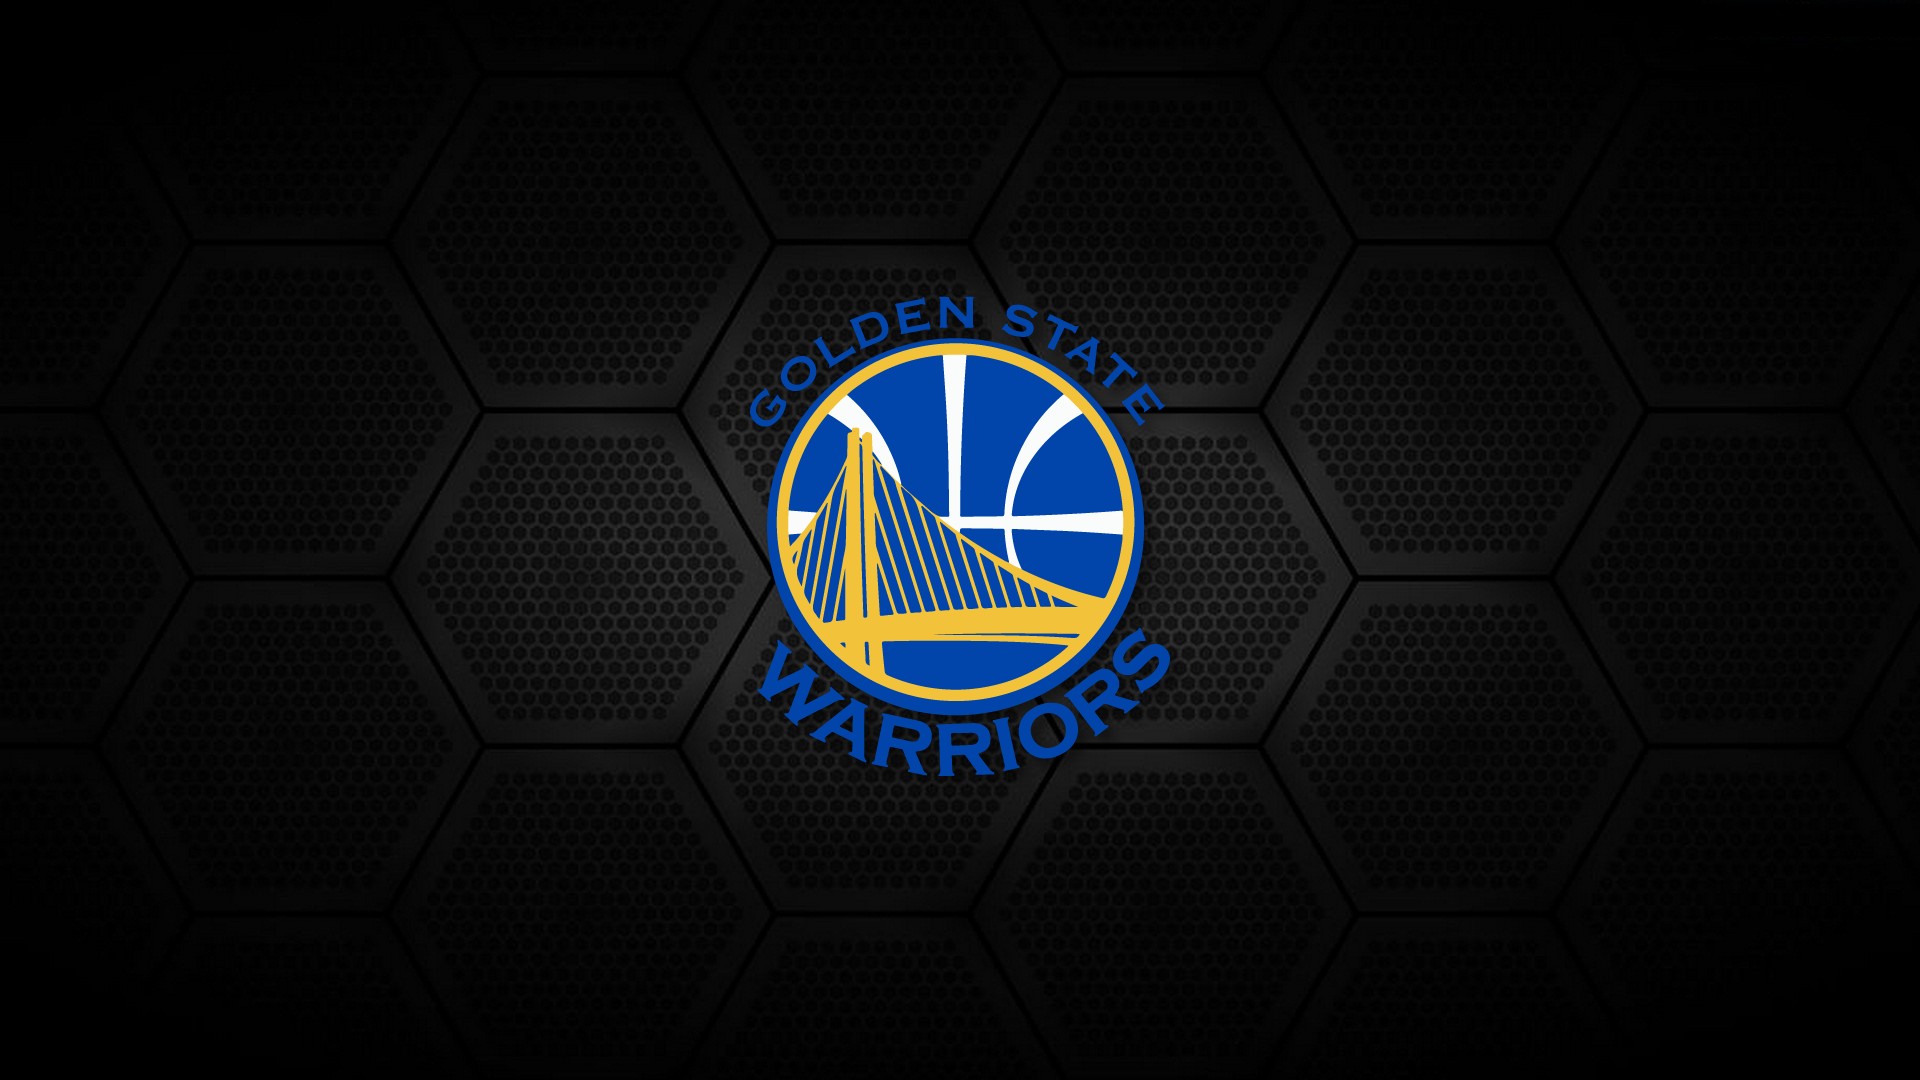 Golden State Warriors Logo For Mac Wallpaper With Image - Circle -  1920x1080 Wallpaper 